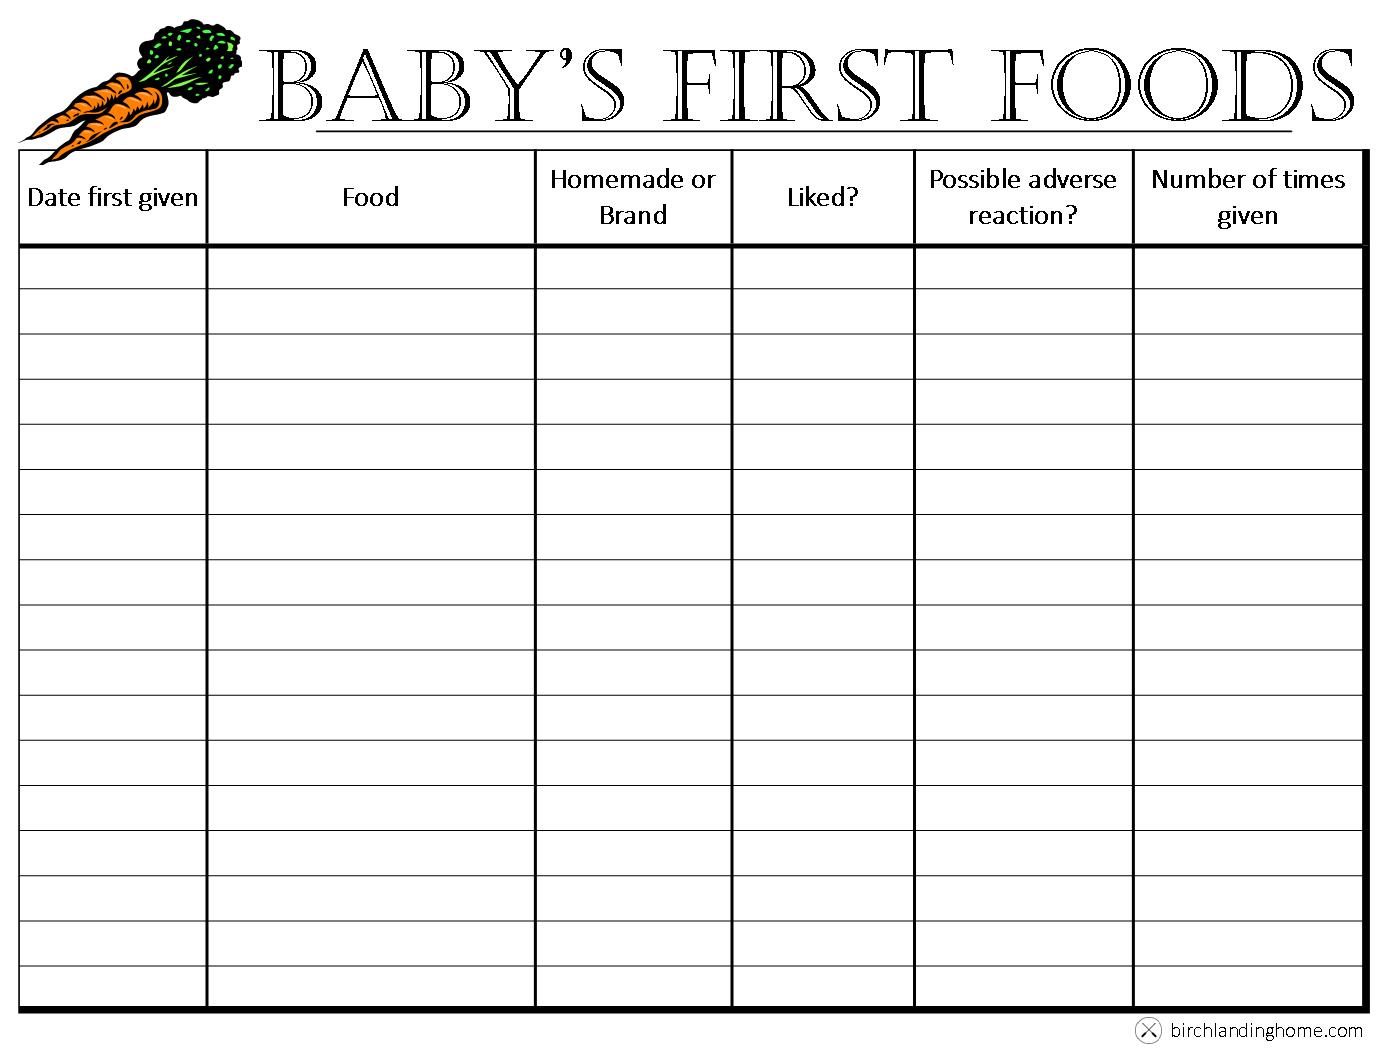 baby-s-first-foods-the-basics-free-printable-chart-new-england